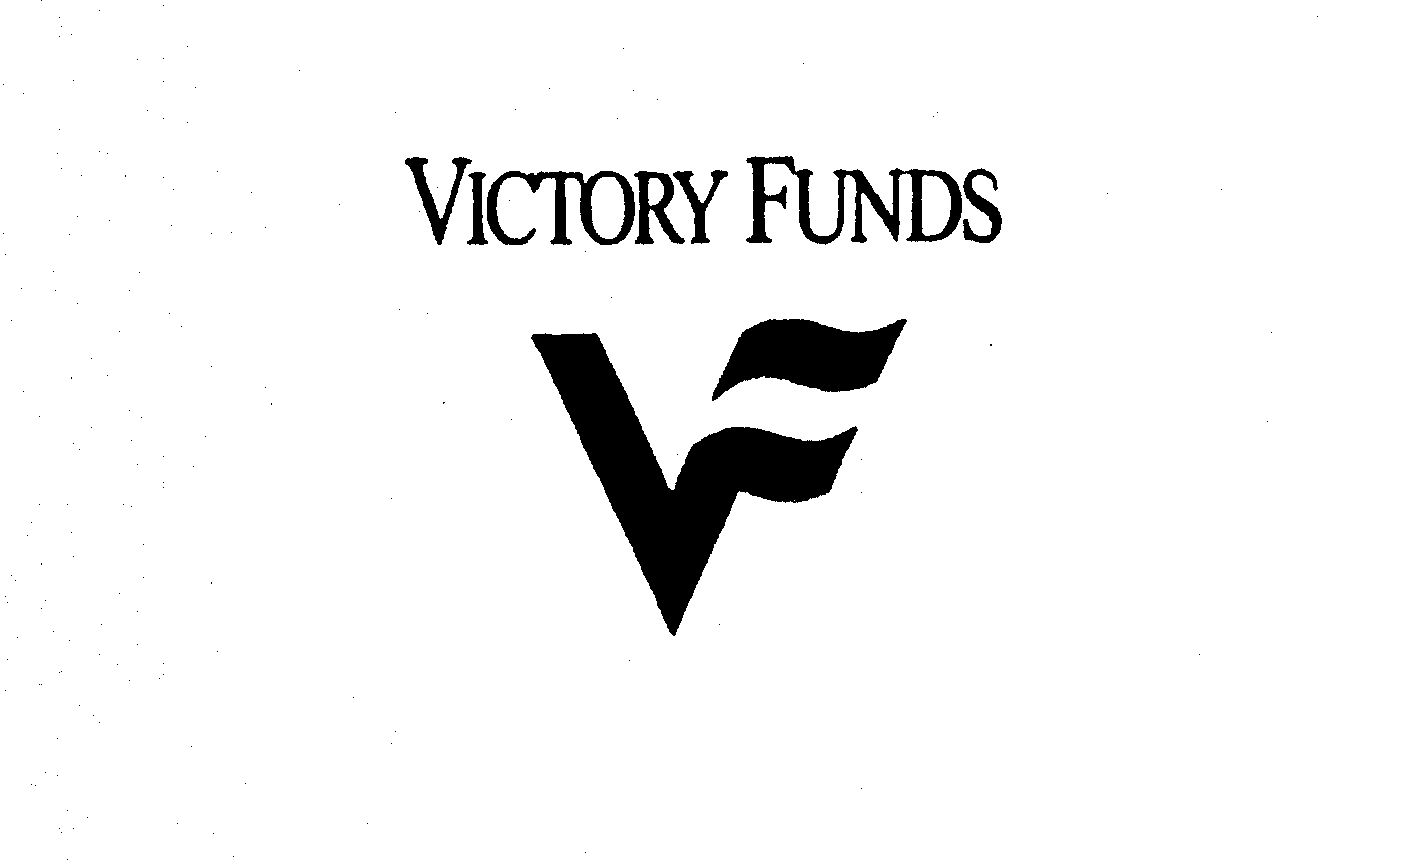  VF VICTORY FUNDS